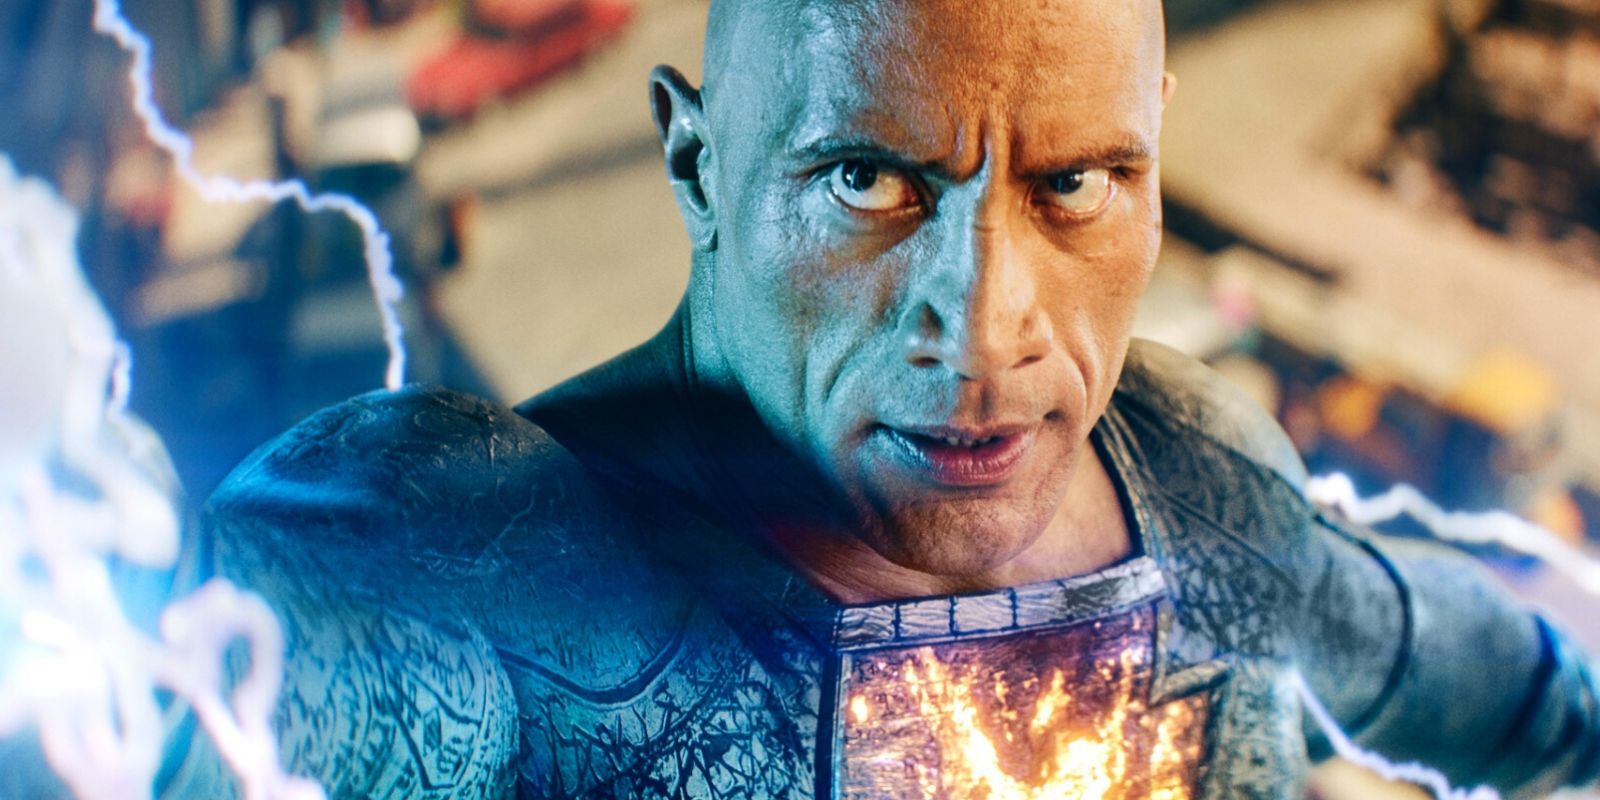 Dwayne Johnson as Black Adam, showing off his electricity powers